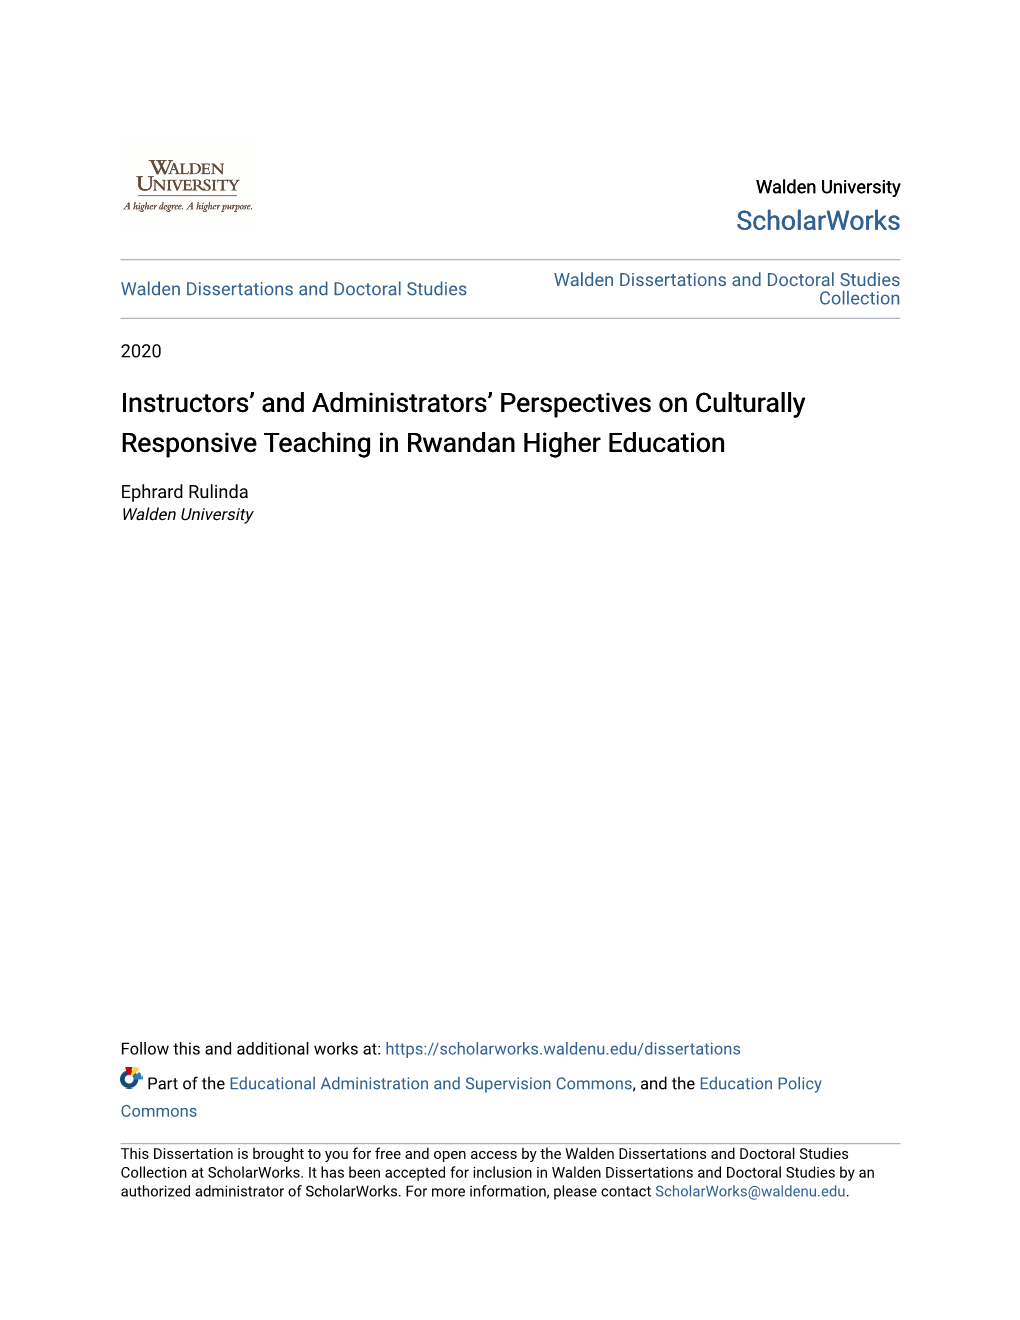 Instructors' and Administrators' Perspectives on Culturally